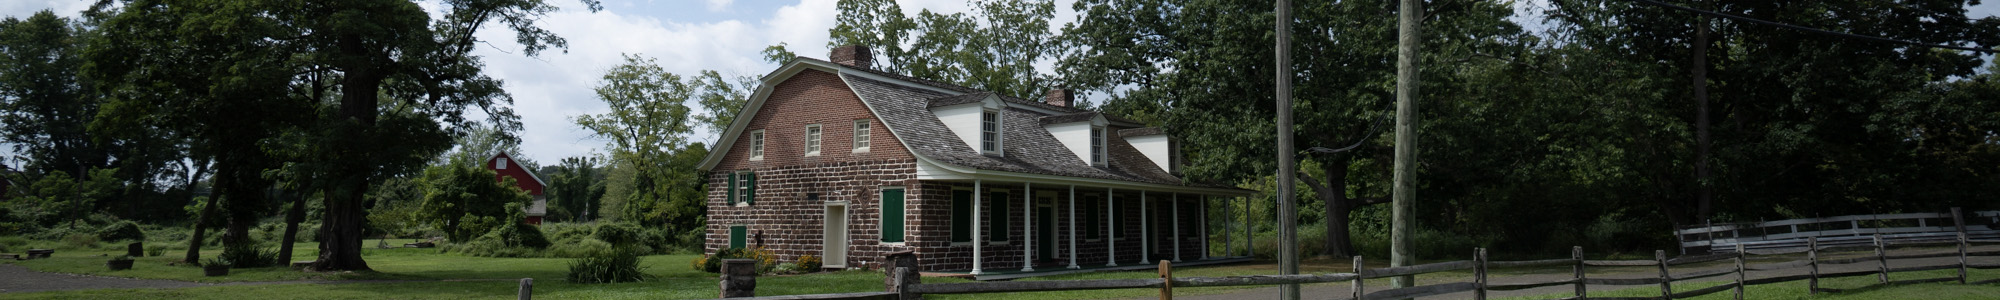 Steuben House State Historic Site